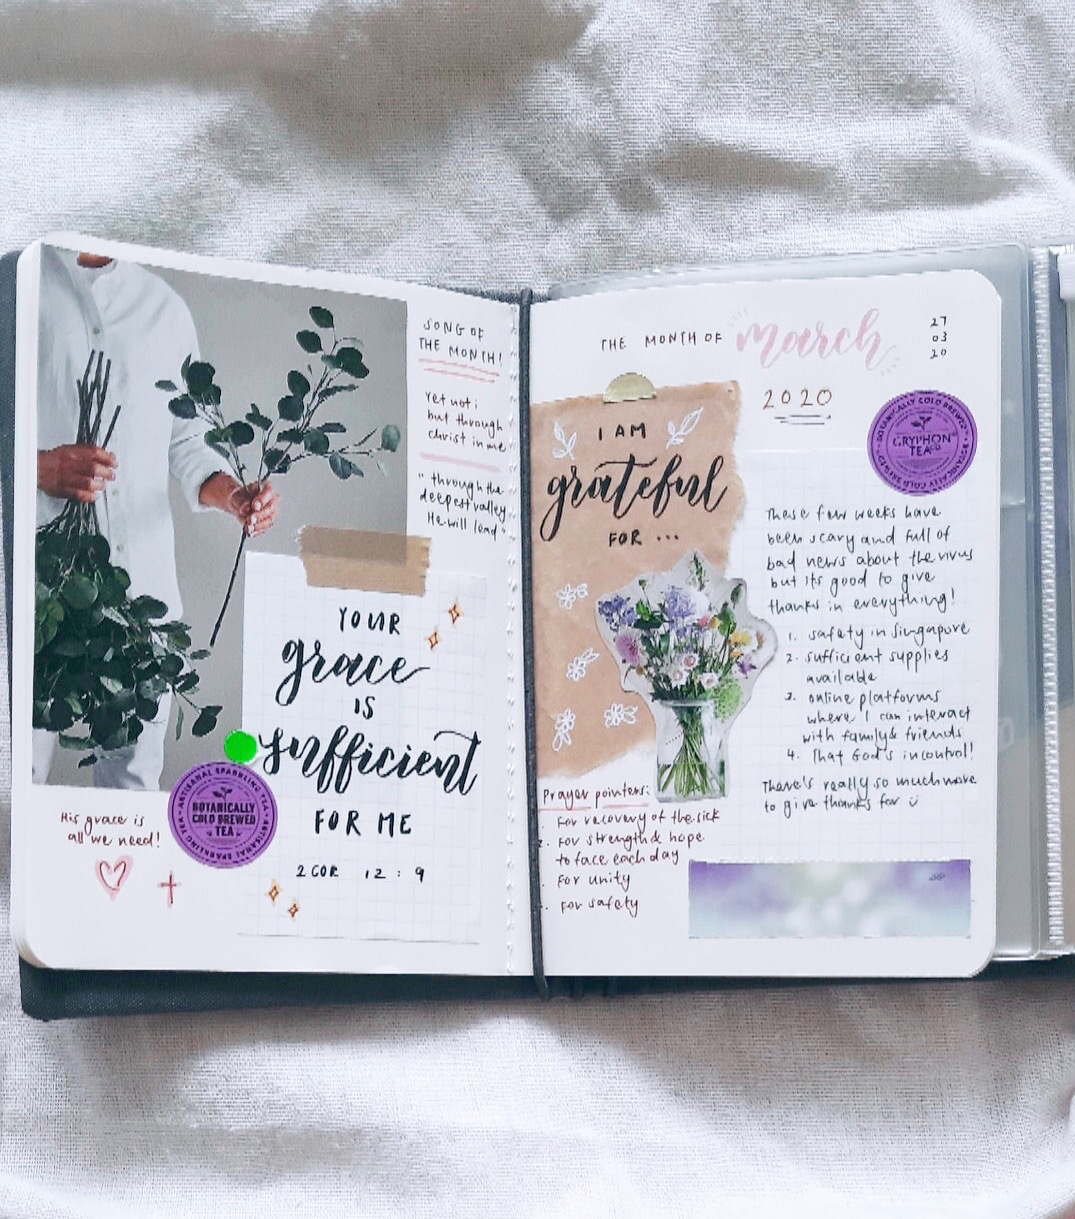 Journals can be a calming and creative way of remembering key events or emotions in our lives.